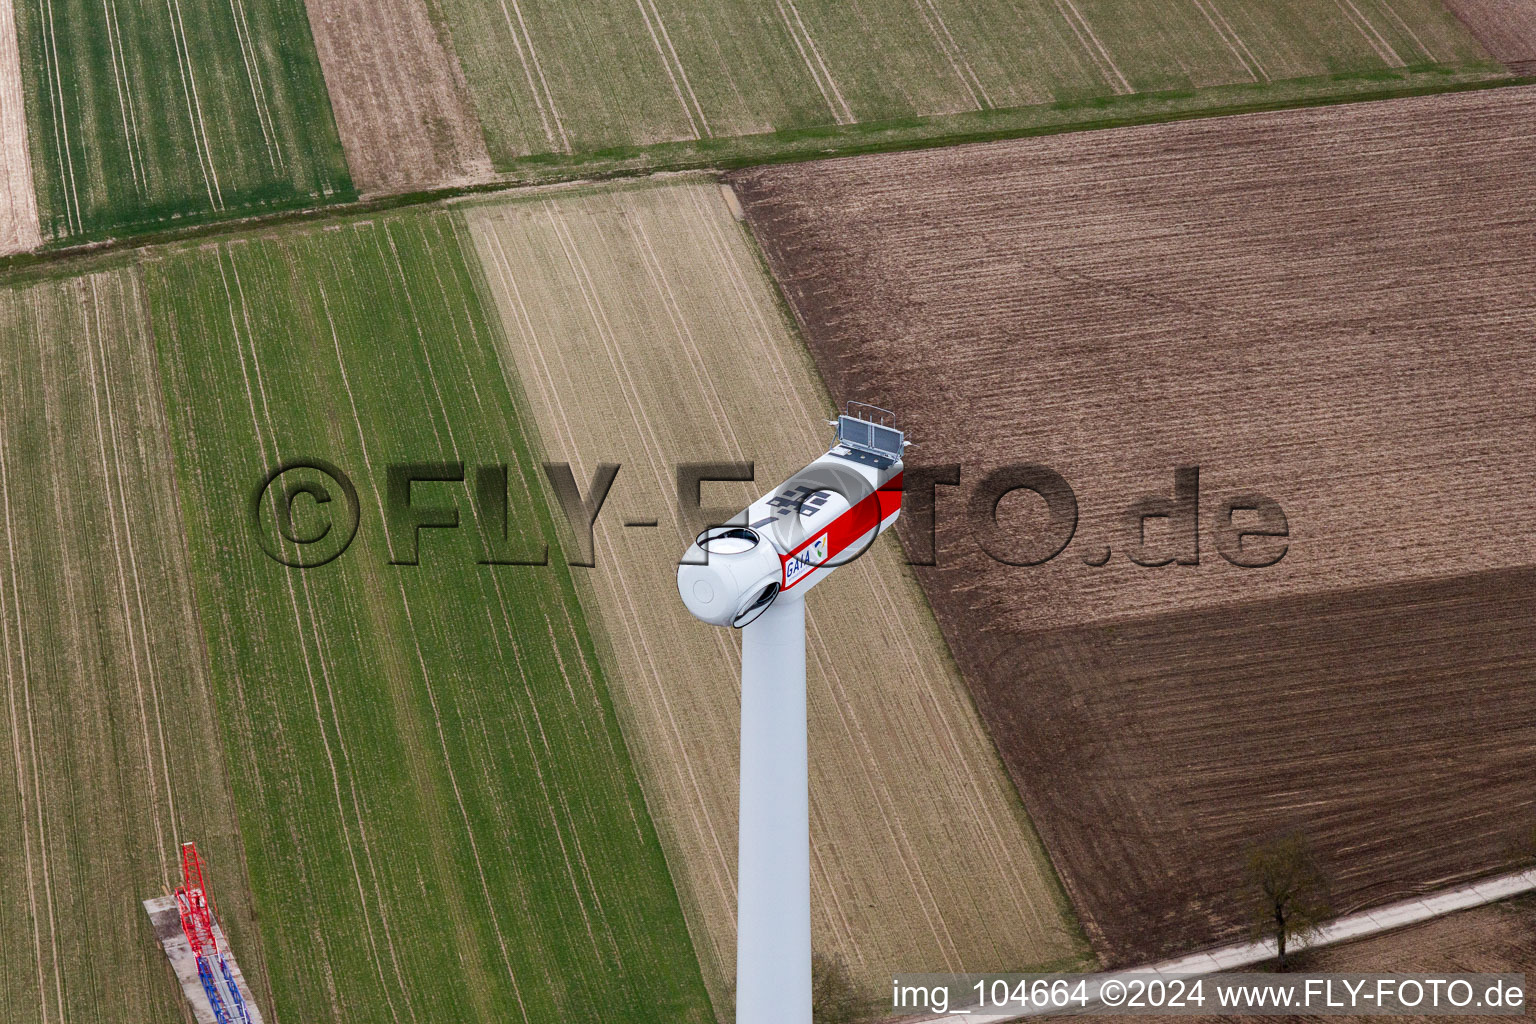 Construction site of the EnBW wind farm Freckenfeld - for a wind turbine with 6 wind turbines in Freckenfeld in the state Rhineland-Palatinate, Germany seen from a drone